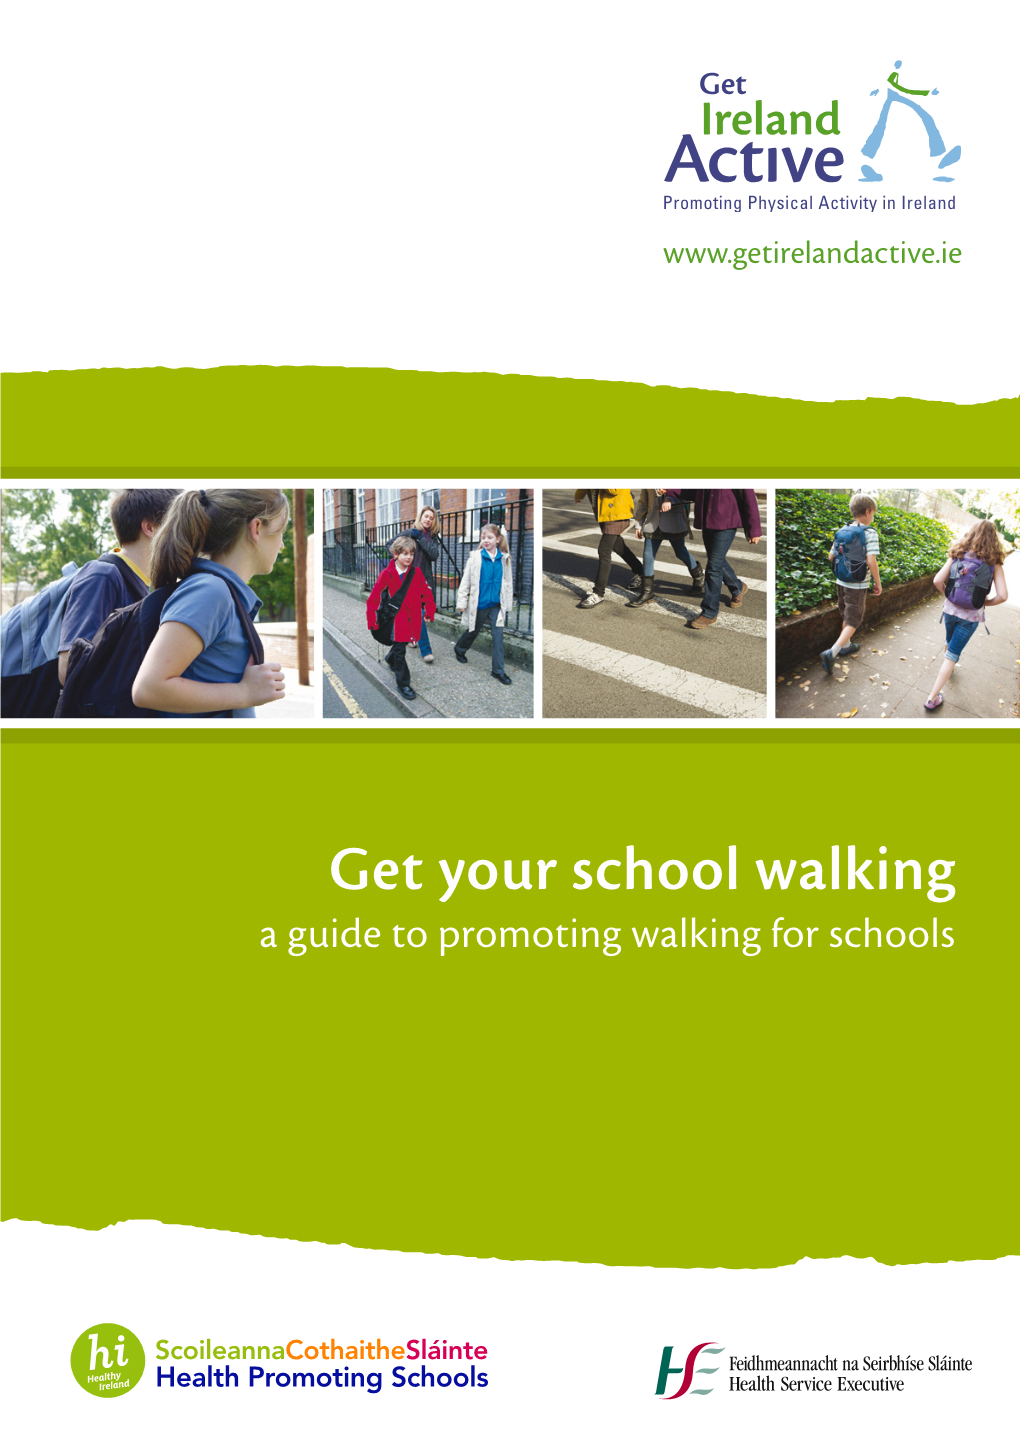 Get Your School Walking a Guide to Promoting Walking for Schools